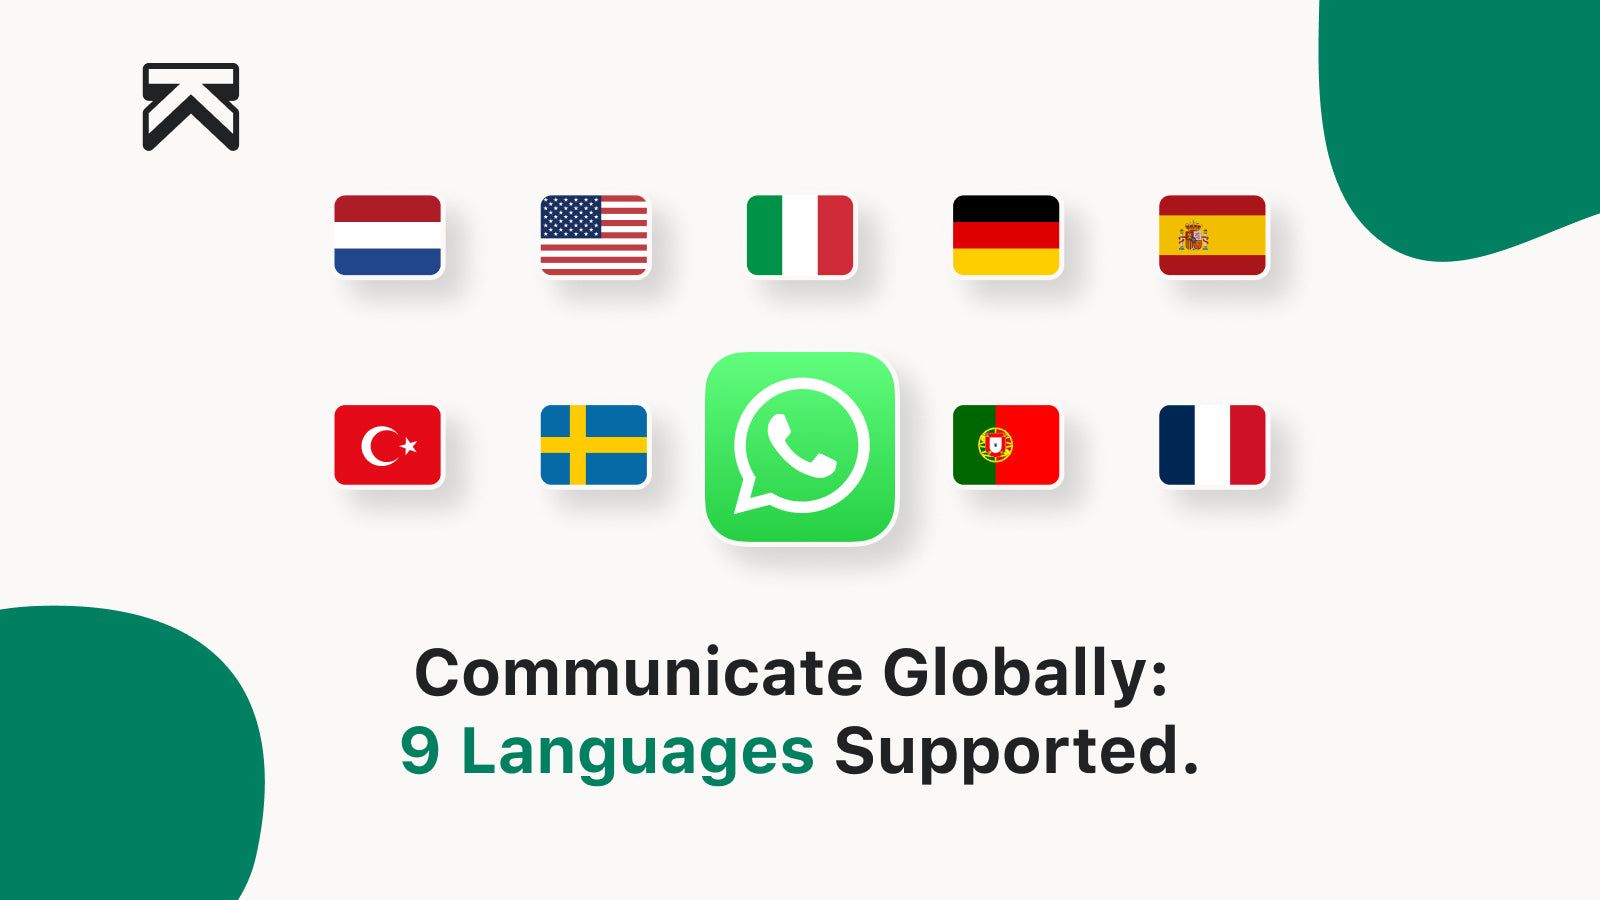 9 languages are Supported.